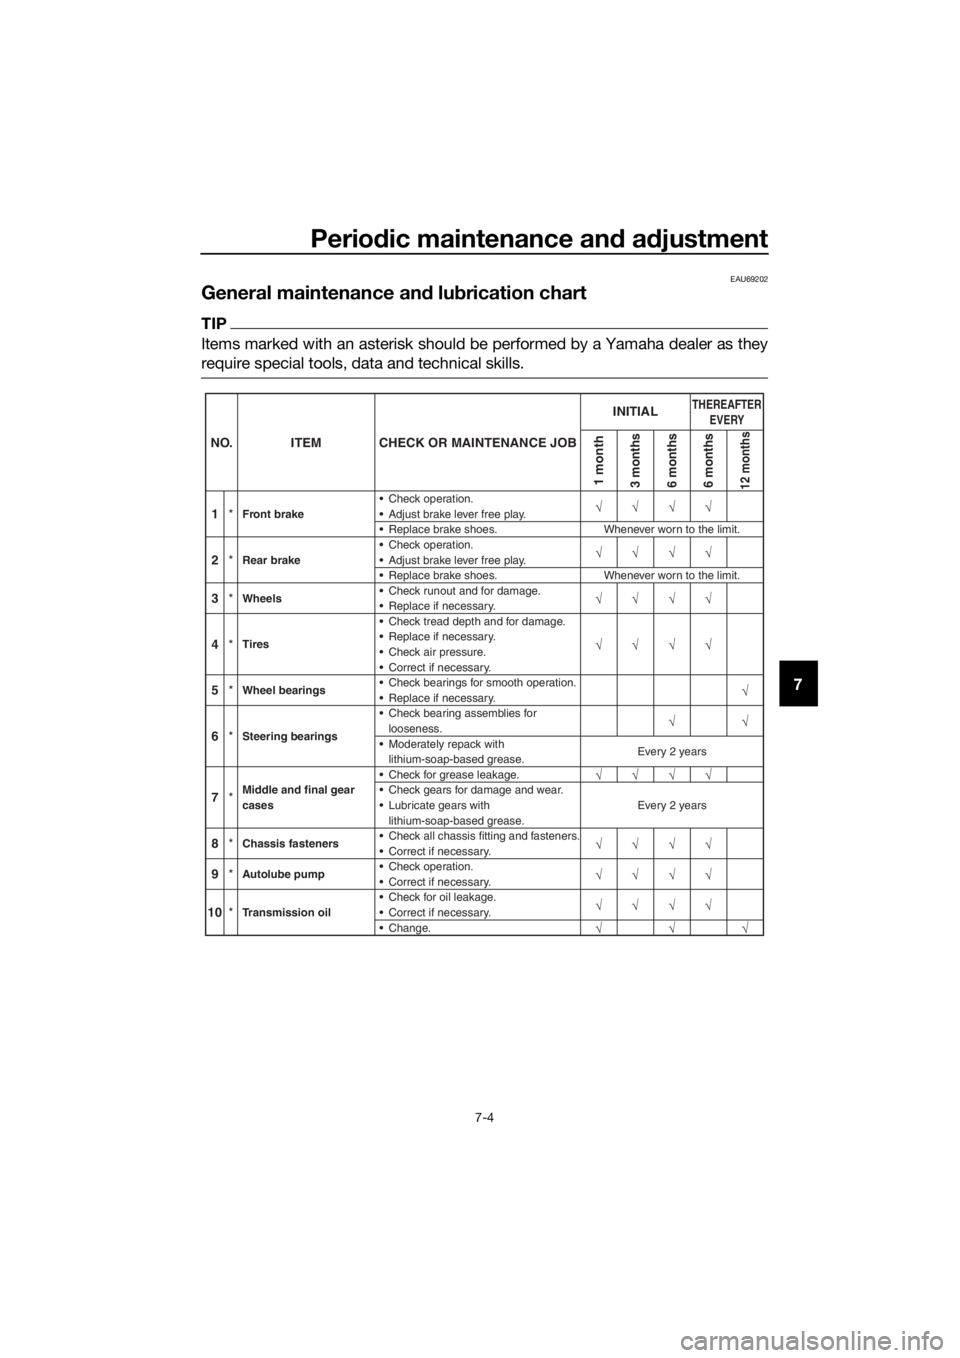 YAMAHA PW50 2016  Owners Manual Periodic maintenance an d a djustment
7-4
7
EAU69202
General maintenance an d lu brication chart
TIP
Items marked with an asterisk should be performed by a Yamaha dealer as they
require special tools,